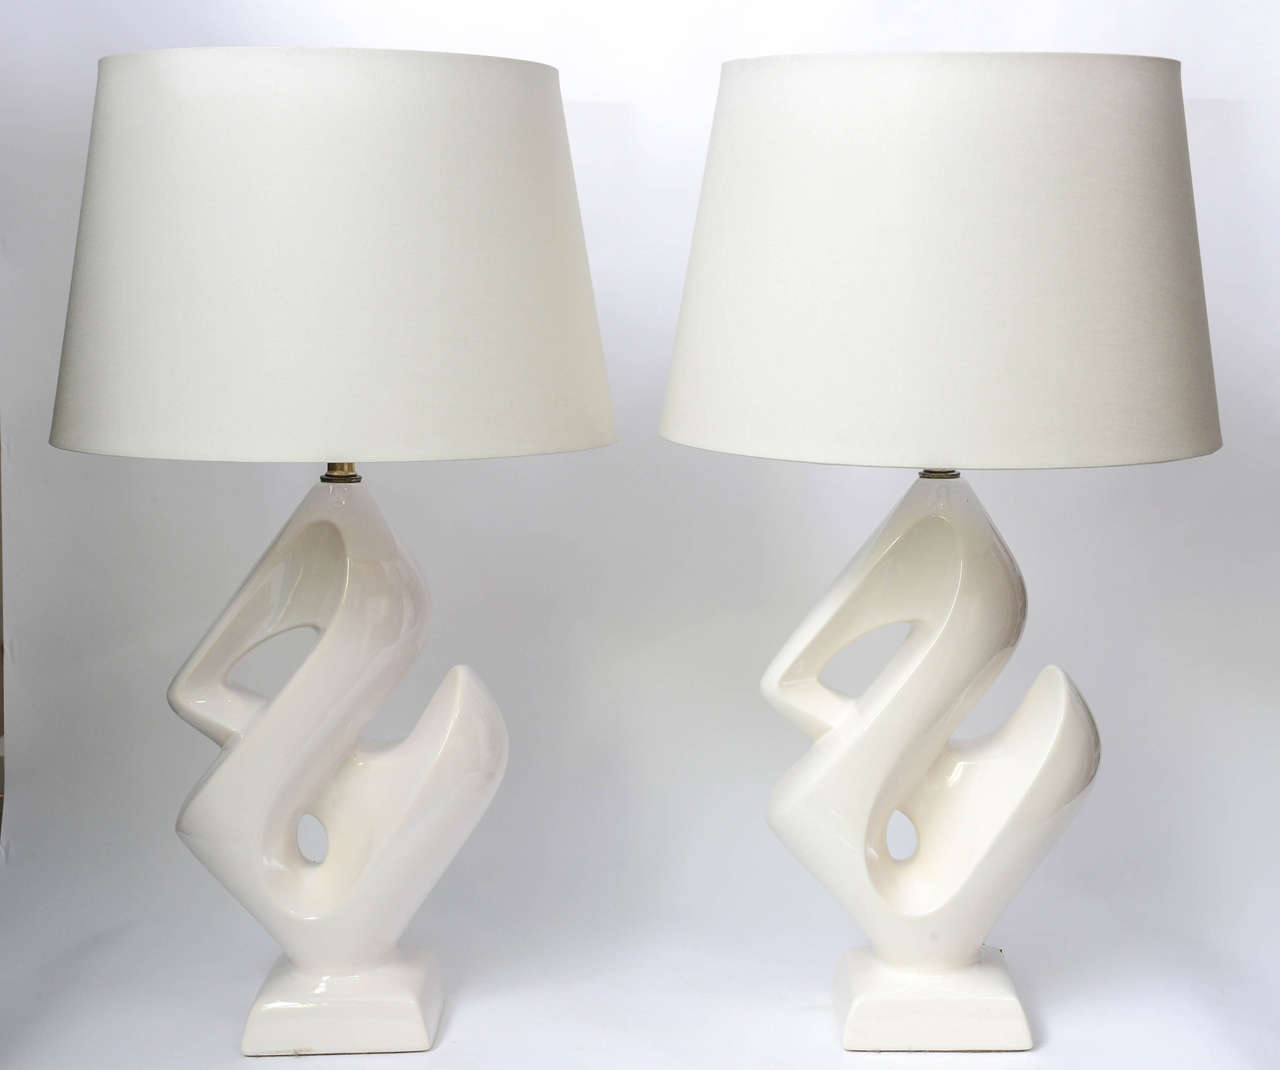 Unusual and striking, never will you find an equal to these vintage marvelous lamps. Base in white ceramic, in the shape of a stylized 